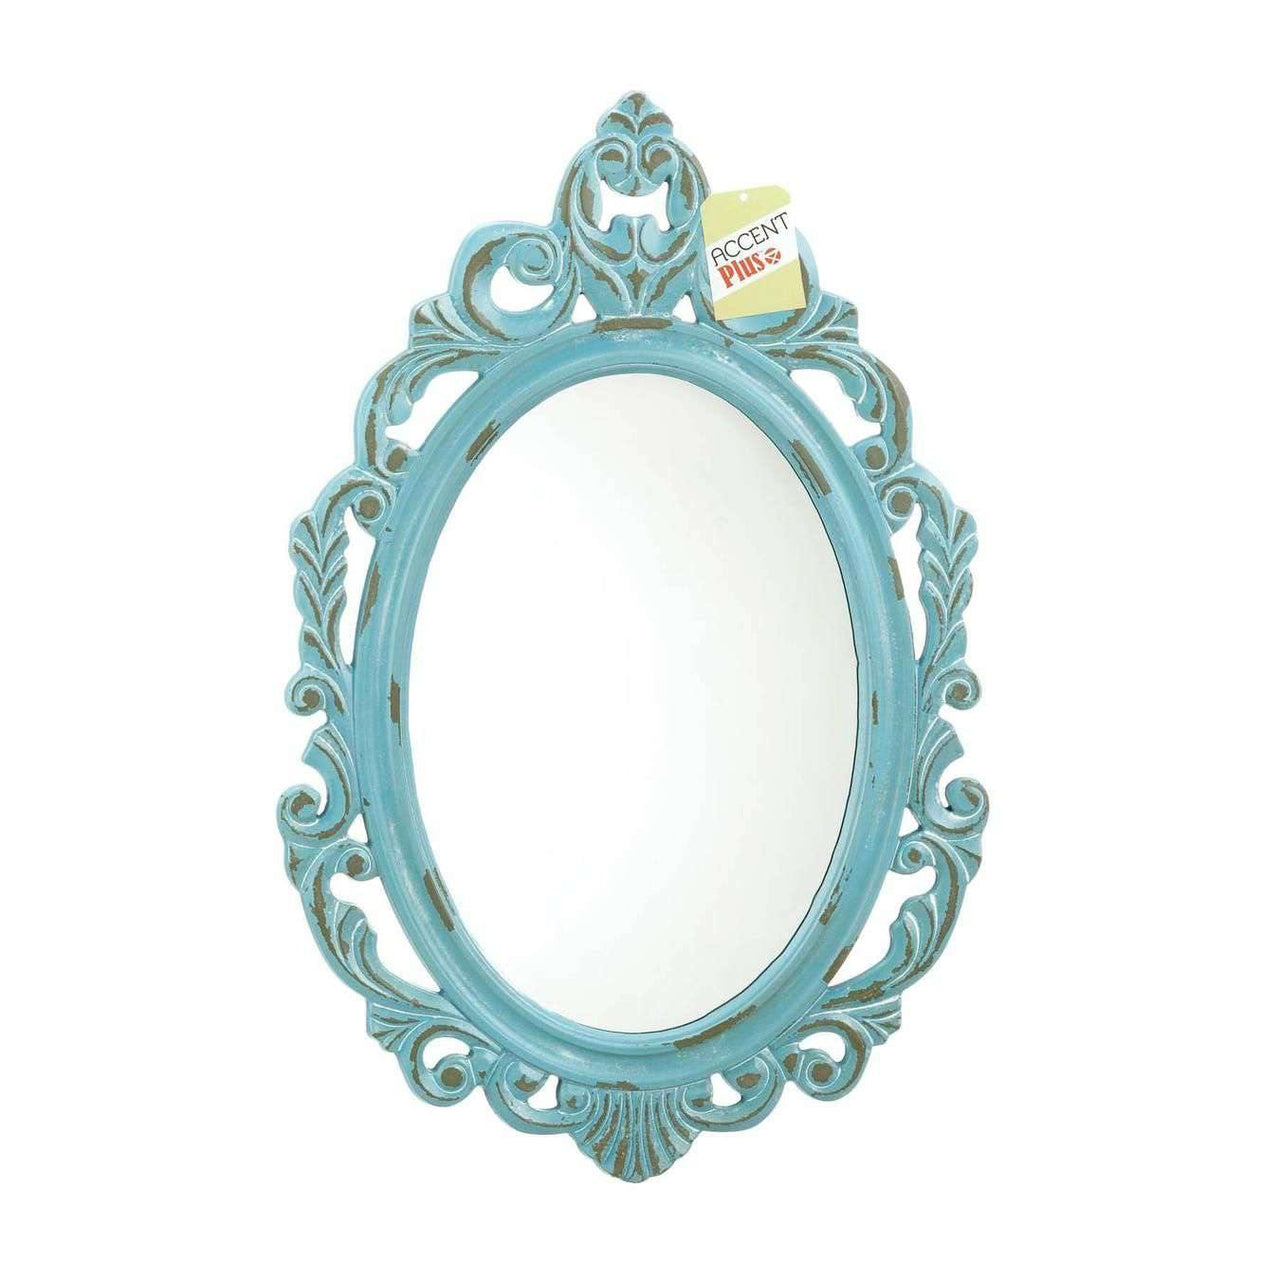 Distressed Baby Blue Wall Mirror - The Fox Decor